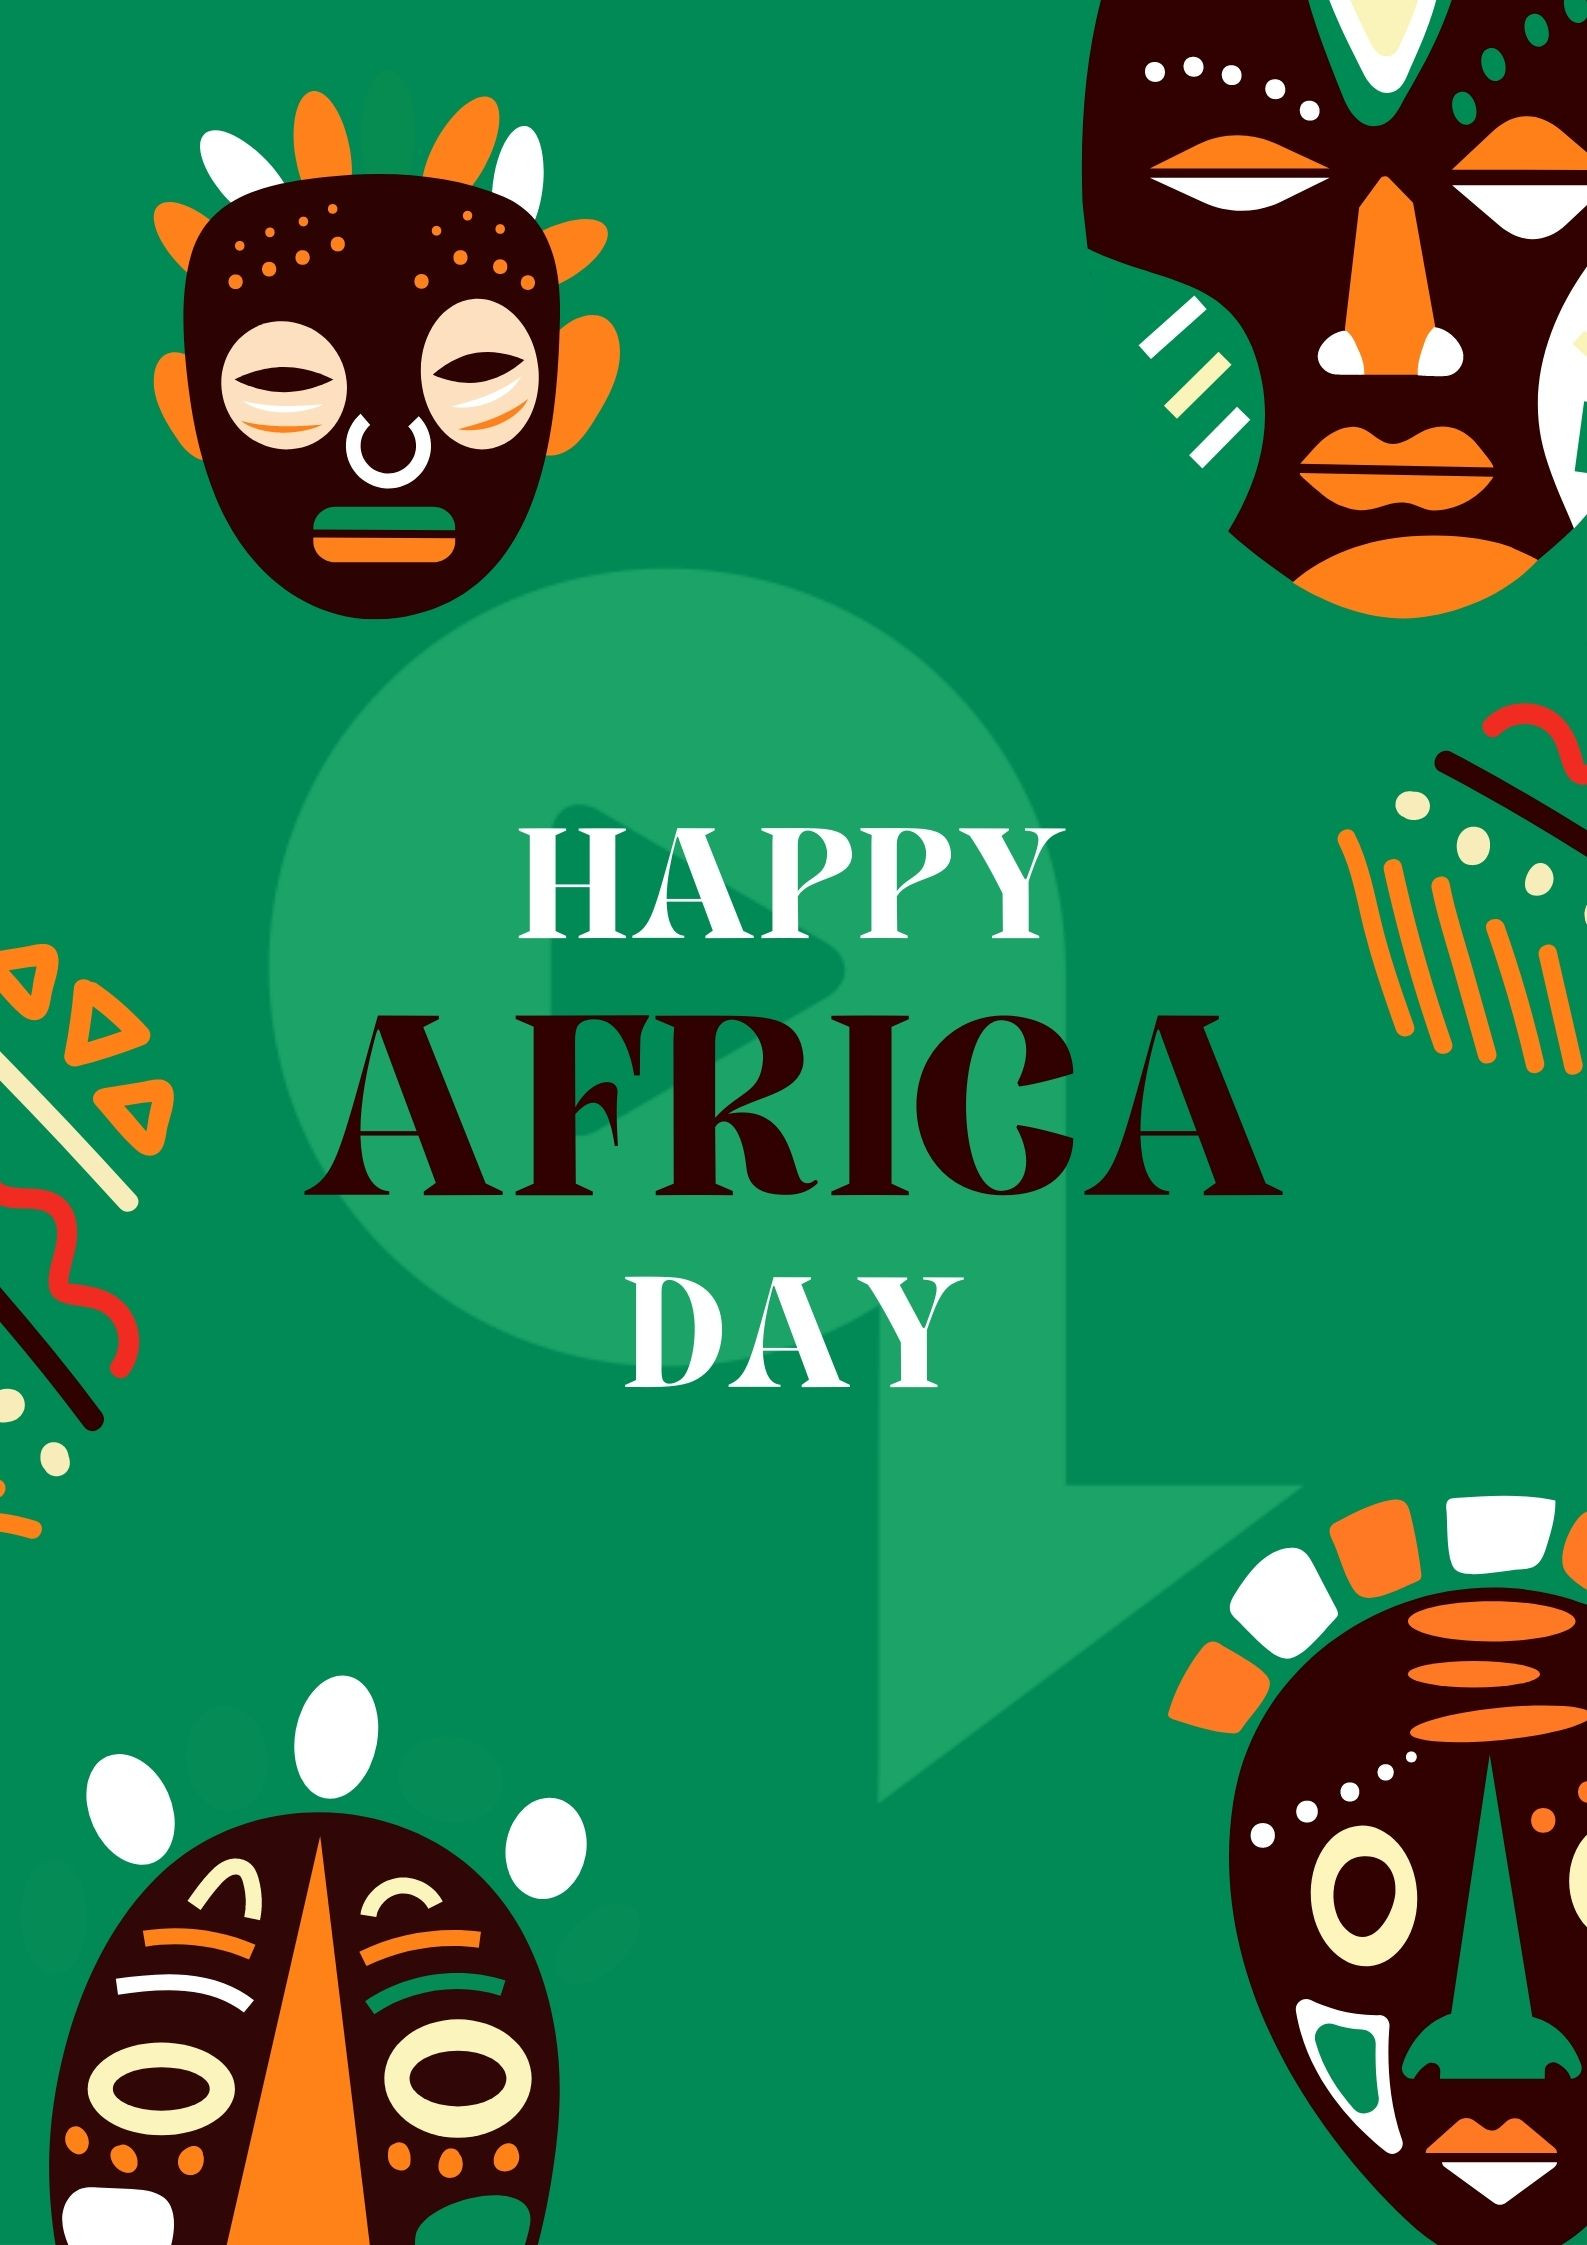 We at Hafrikplay Celebrate African Day With The Rest Of The Continent